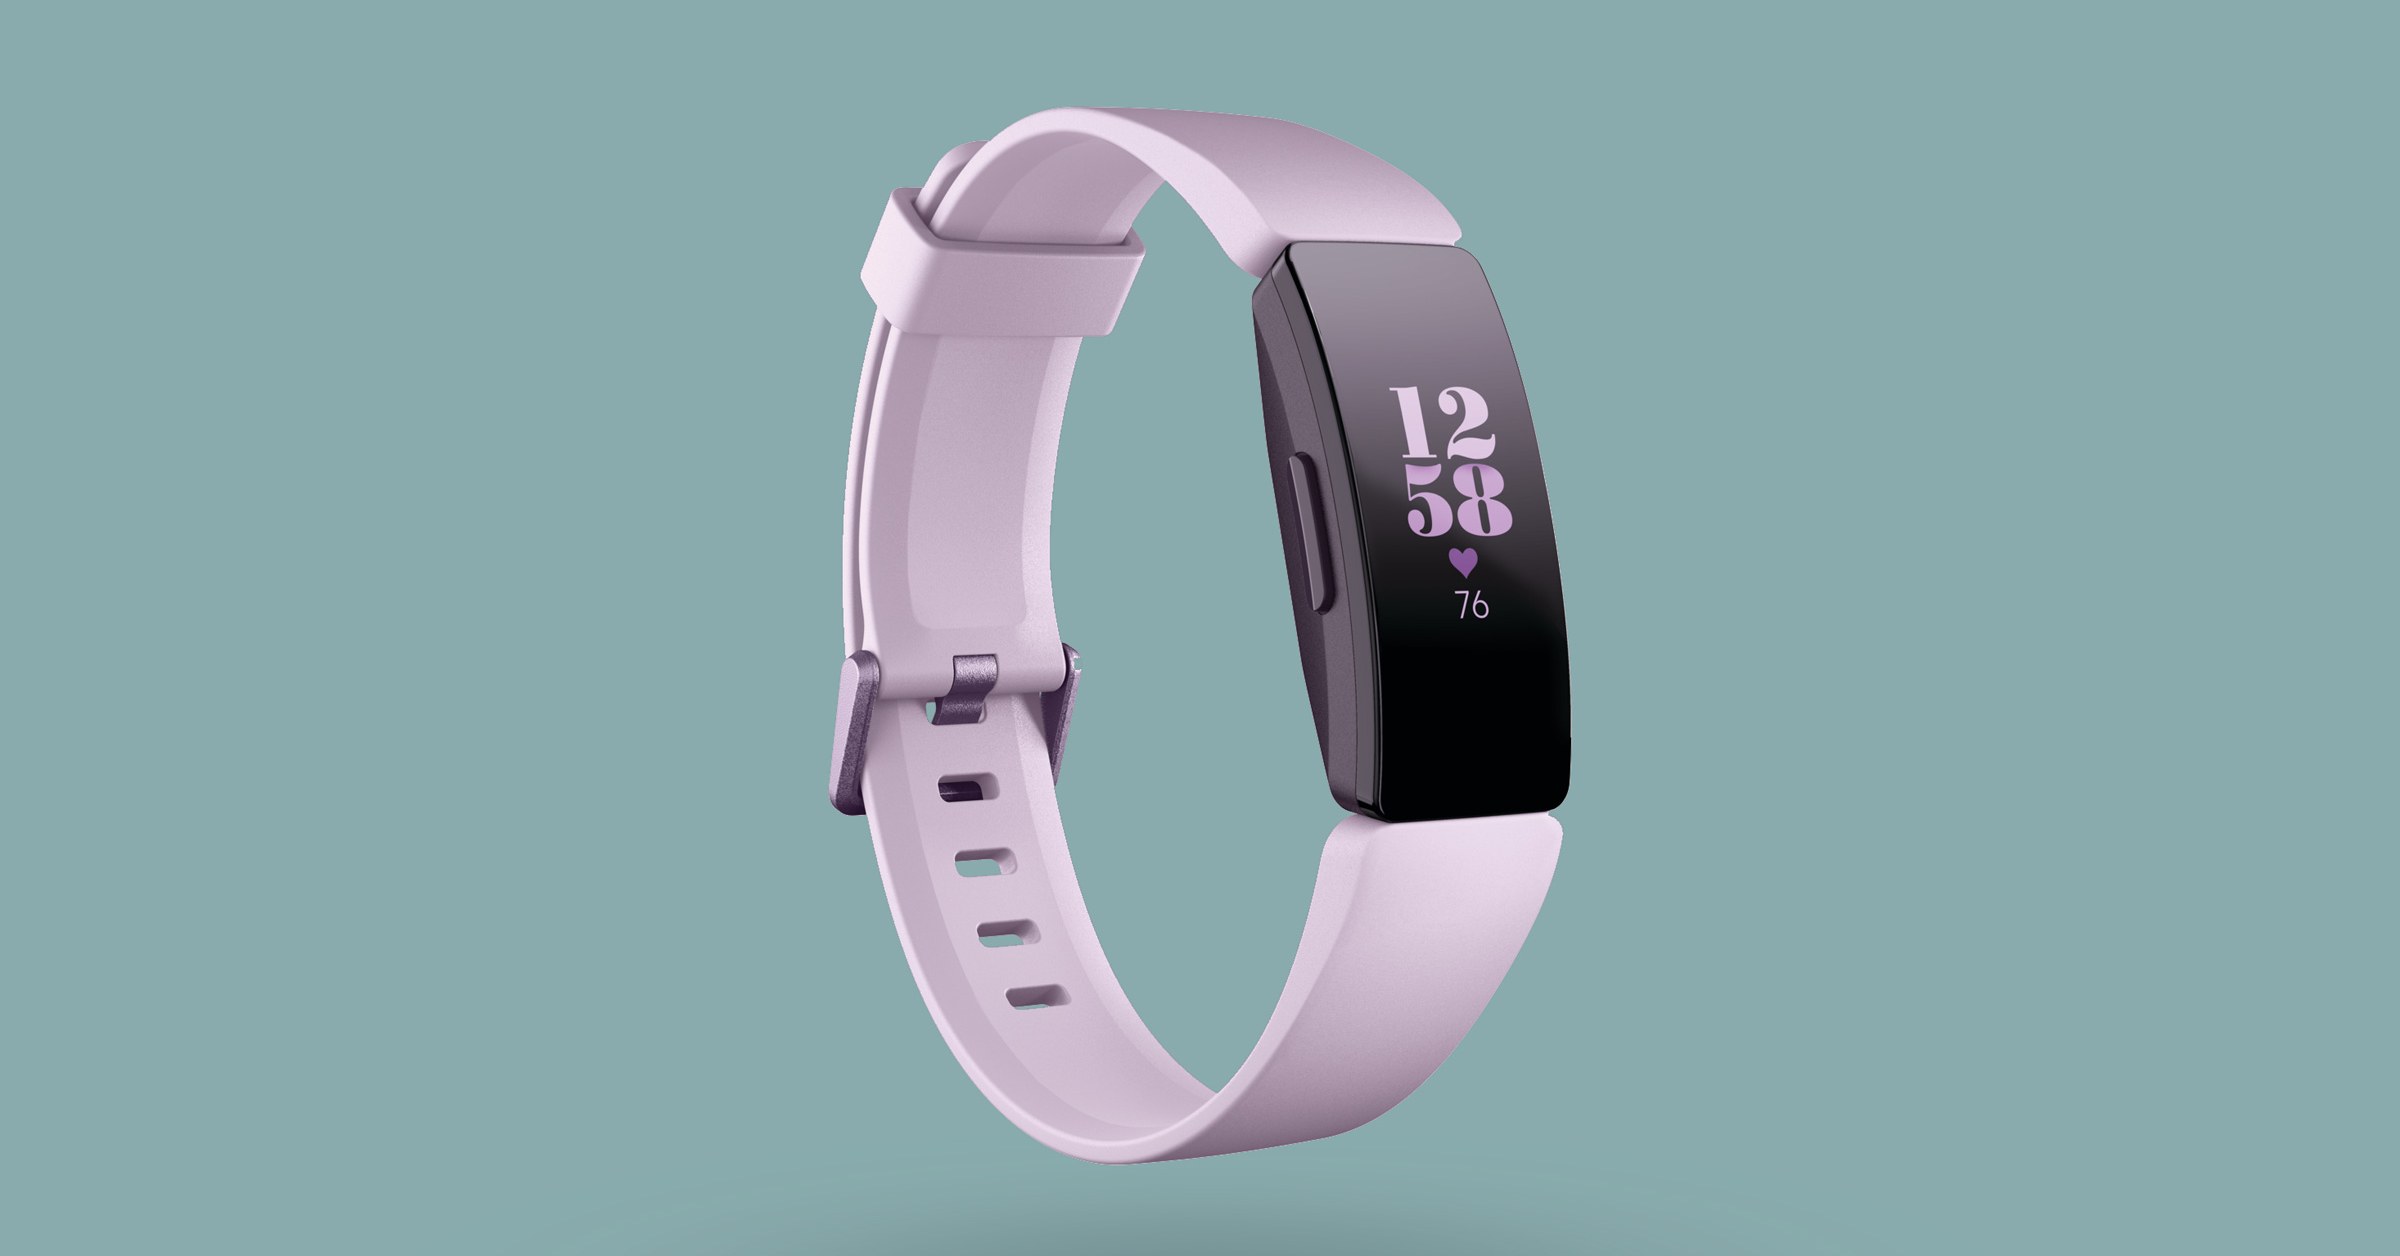 healthy 365 fitbit